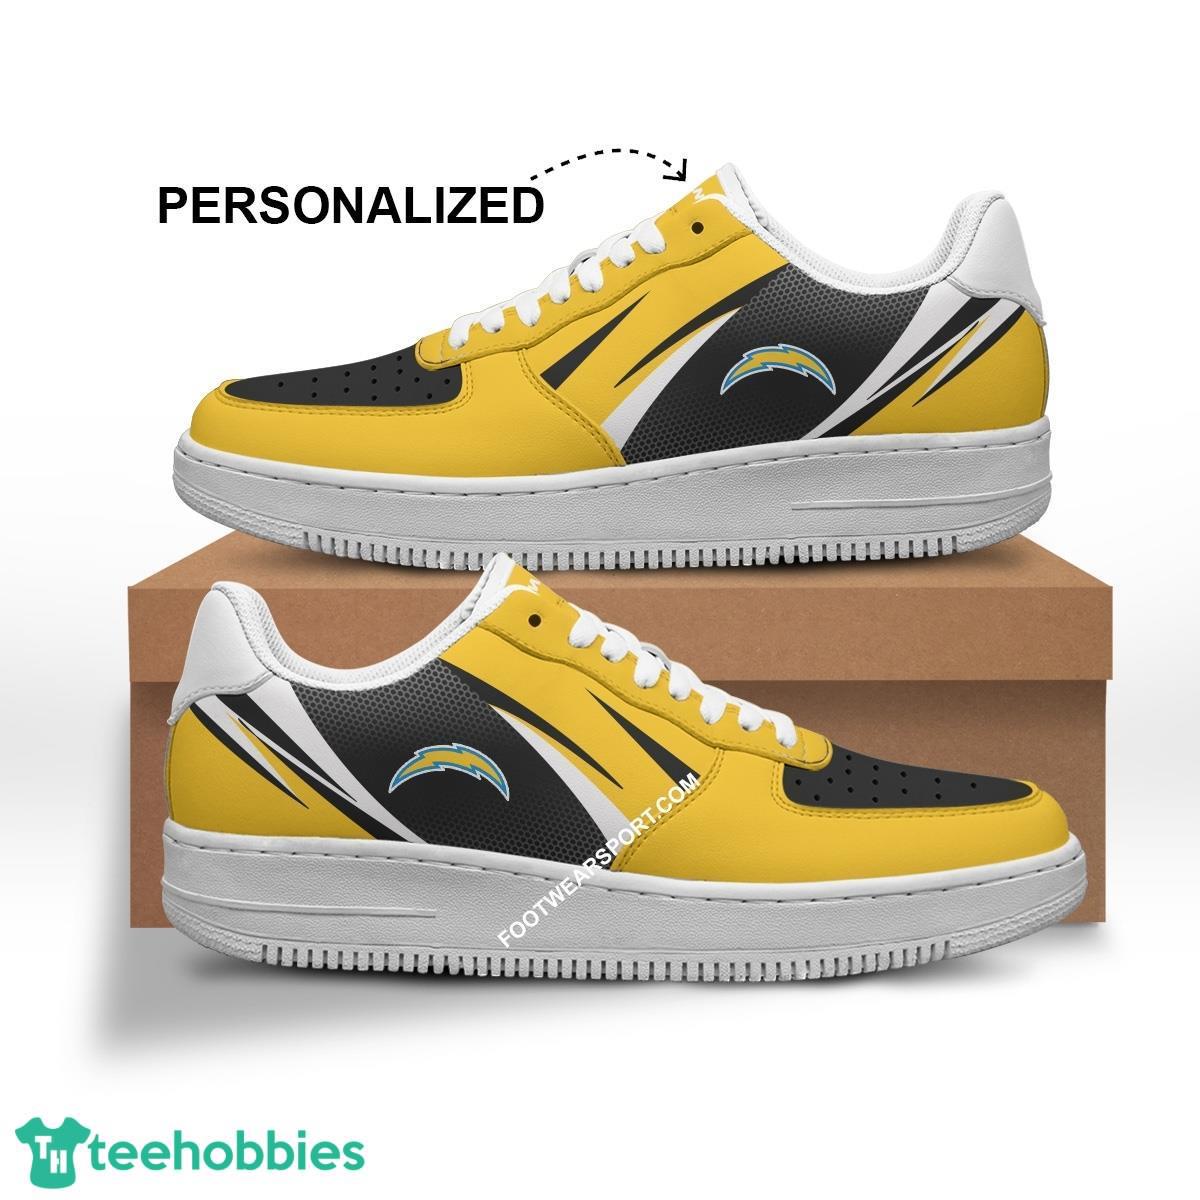 Custom Name Los Angeles Chargers Air Force 1 Shoes Trending Design Gift For Men Women Fans - NFL Los Angeles Chargers Air Force 1 Shoes Personalized Style 1